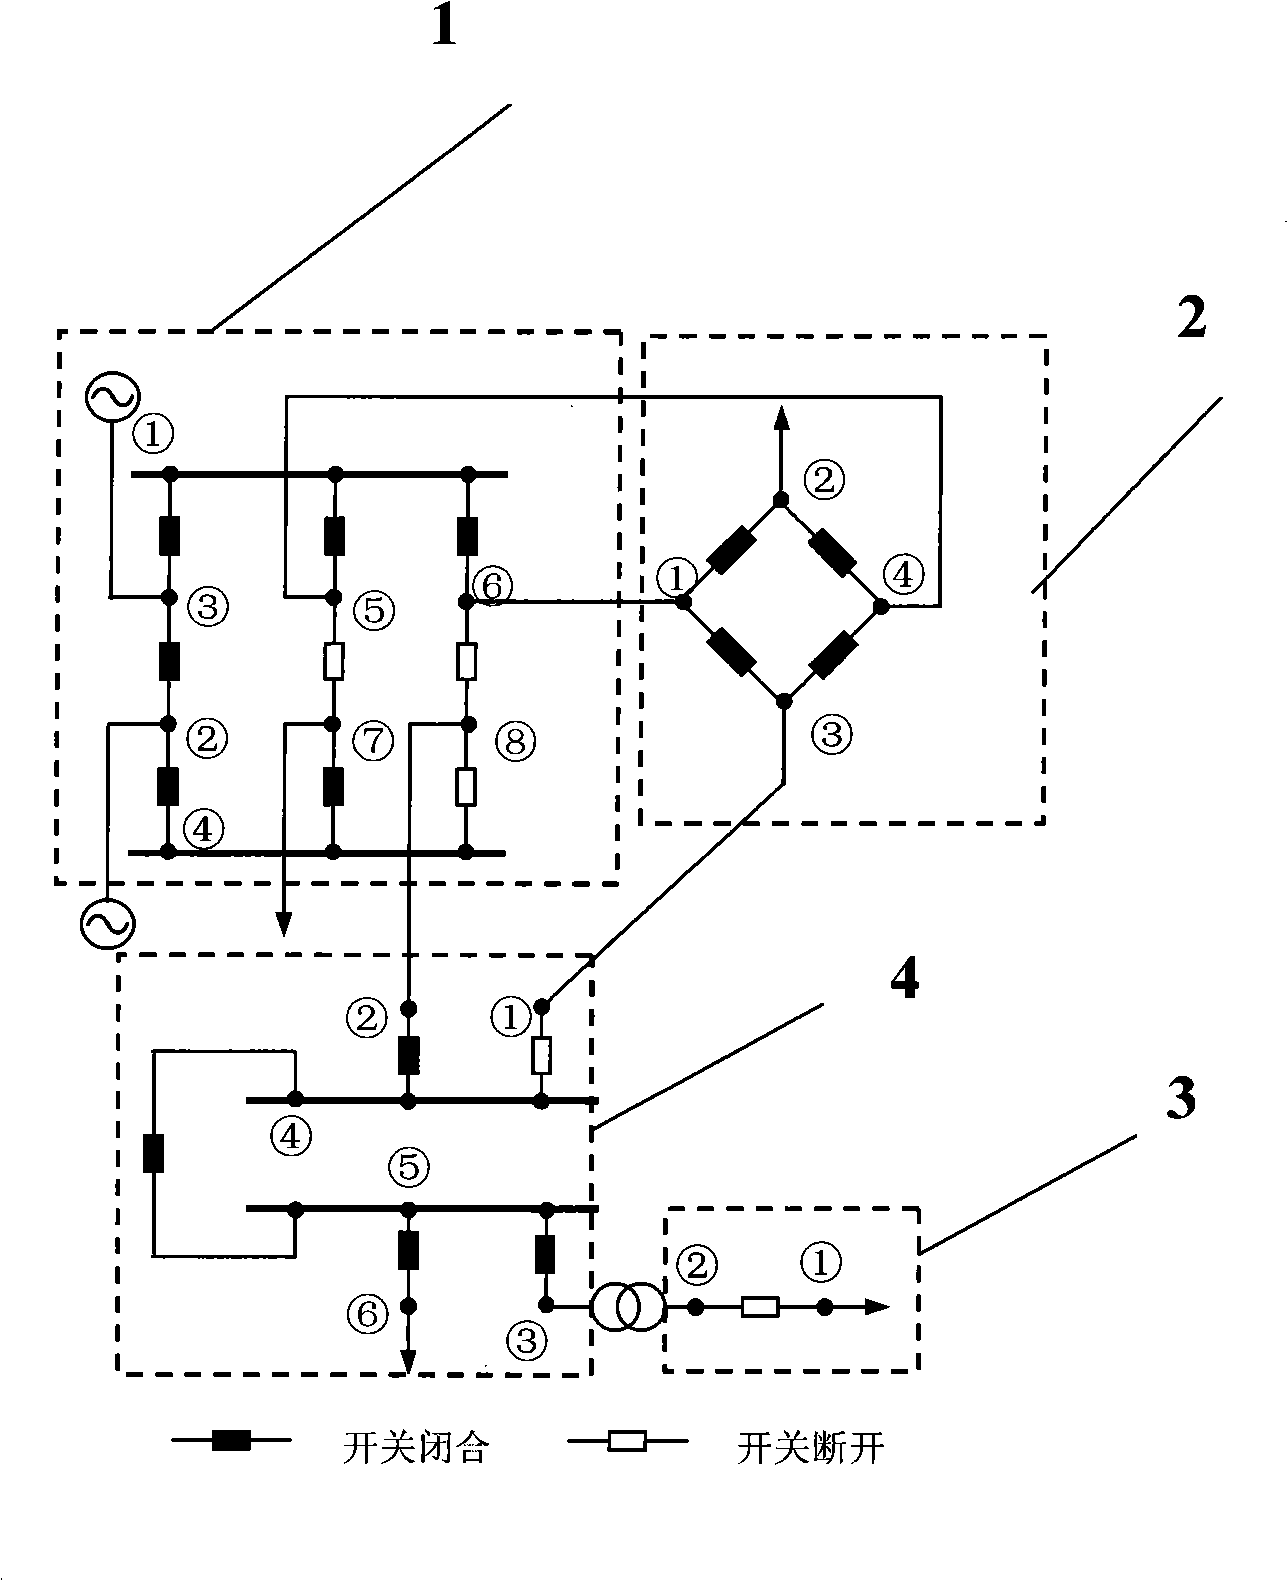 Network topology analyzing method for electrical power system